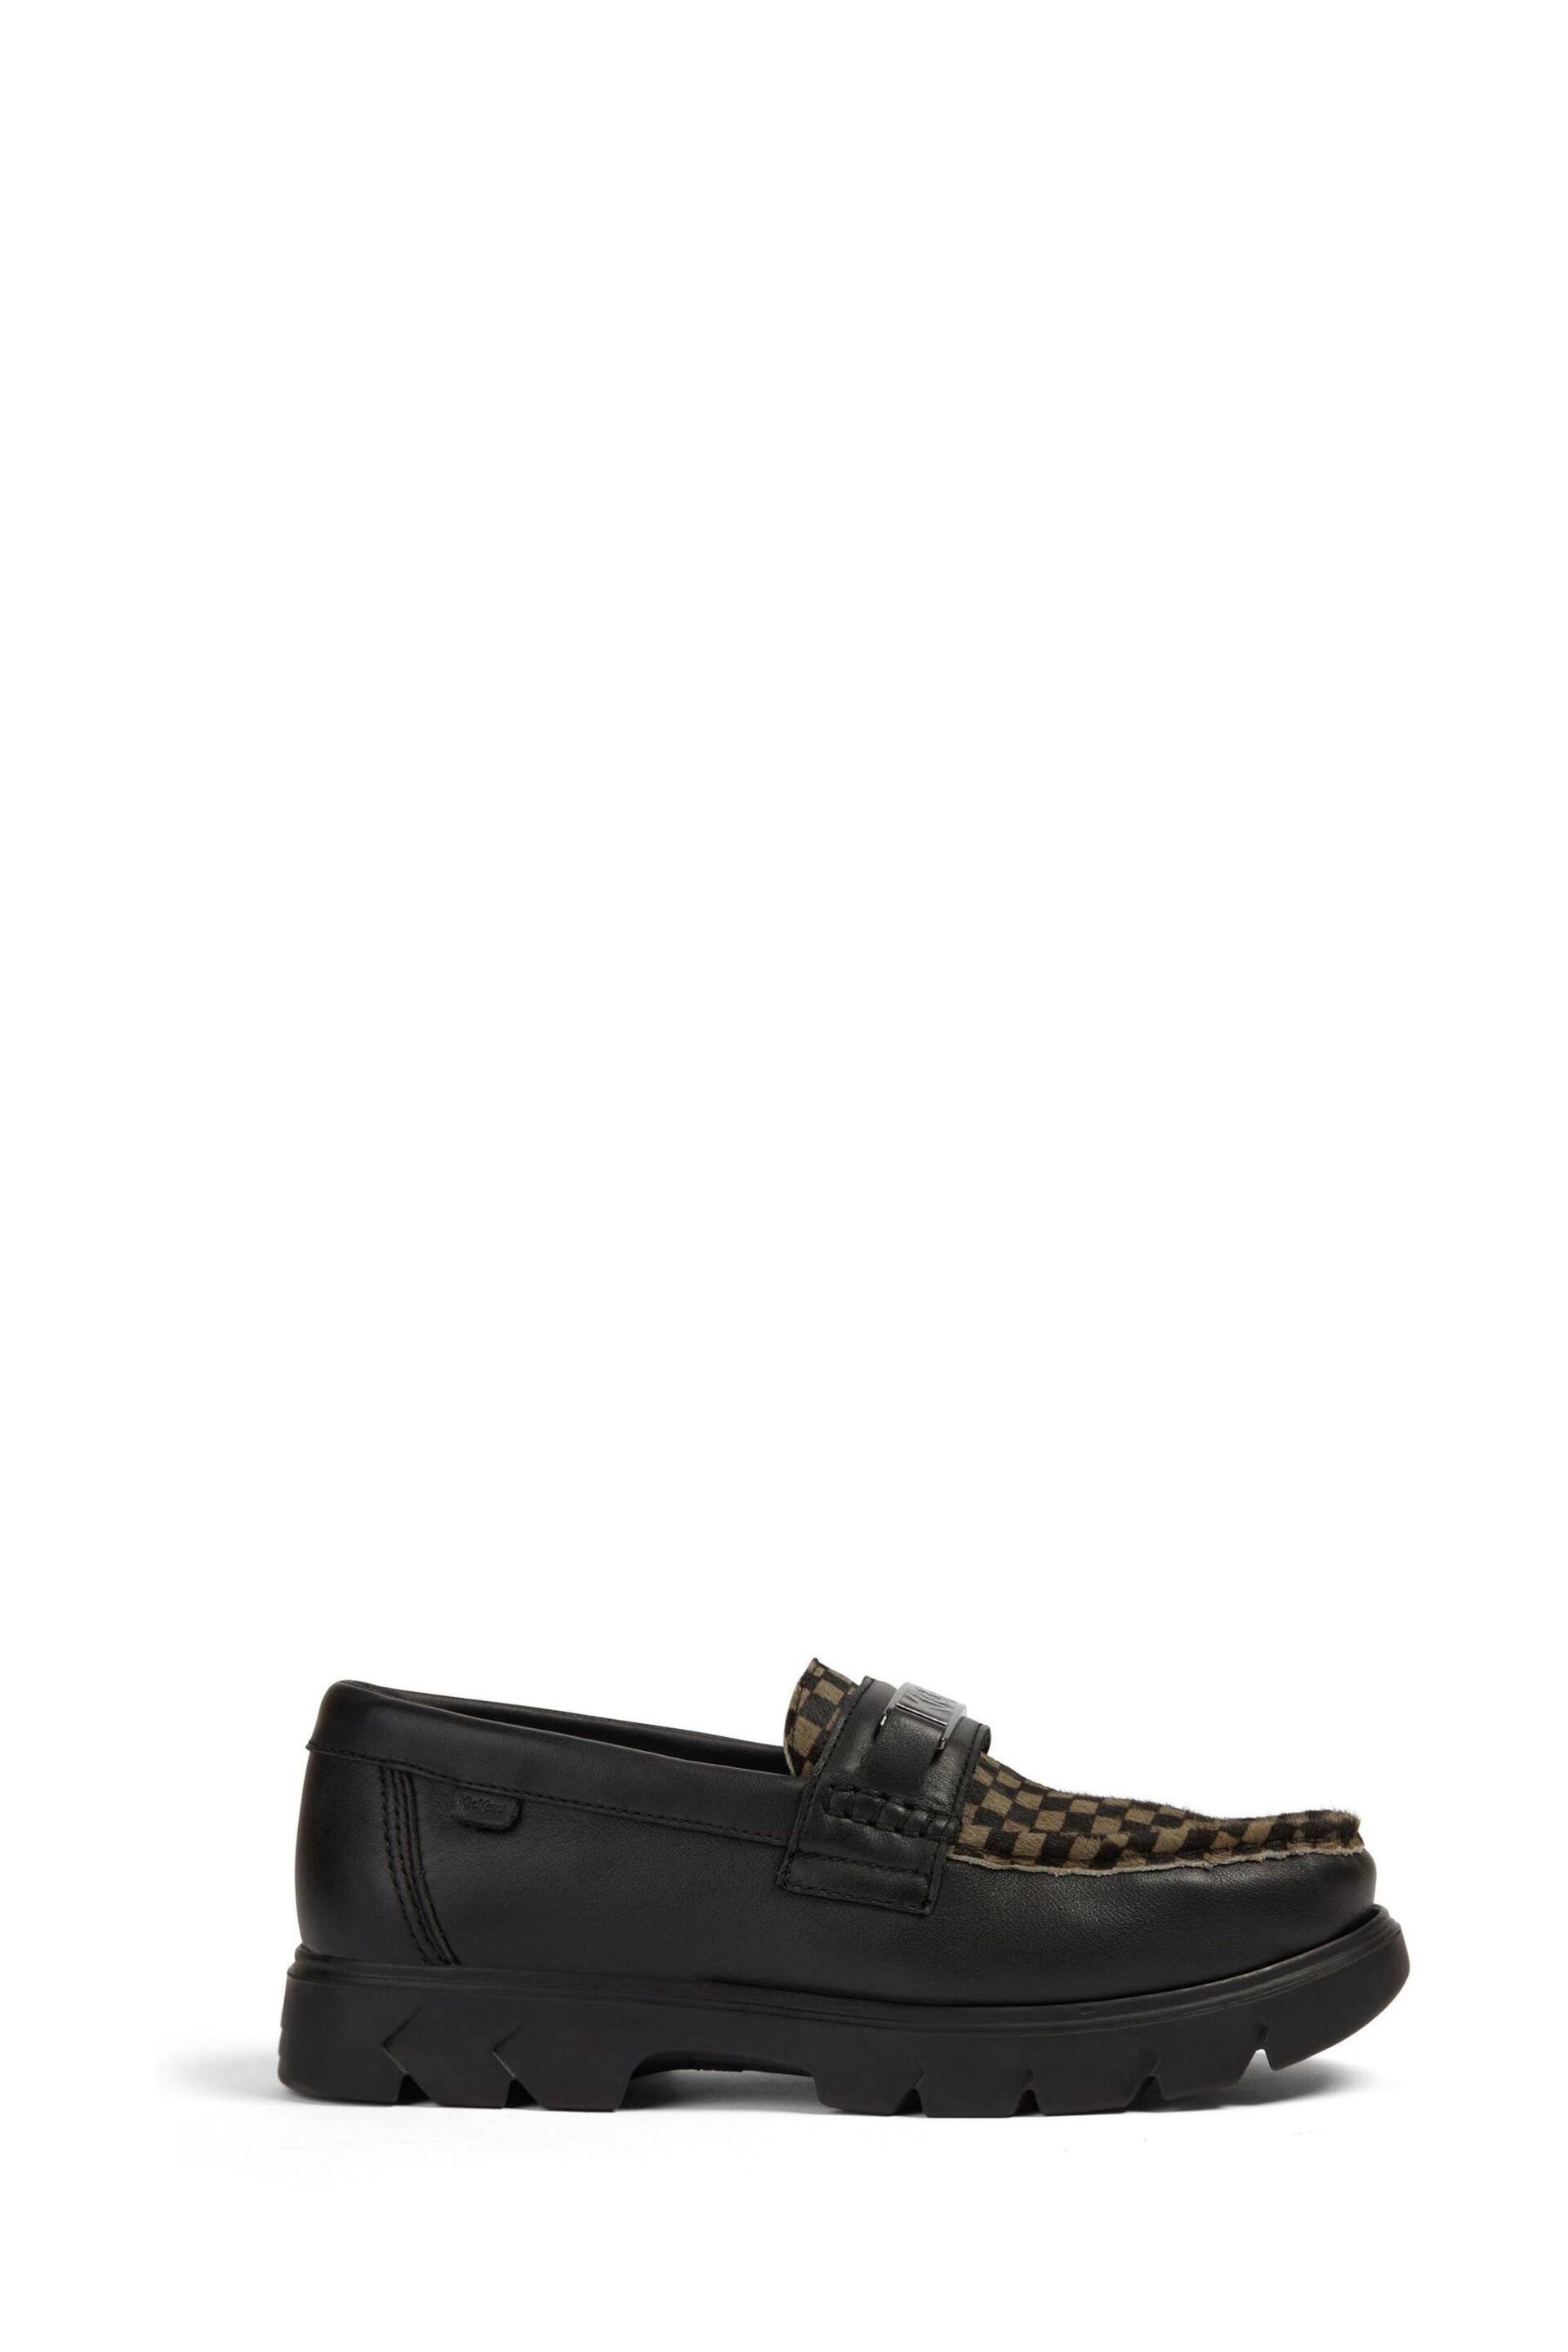 Kickers Lennon Black Loafers - Image 1 of 6